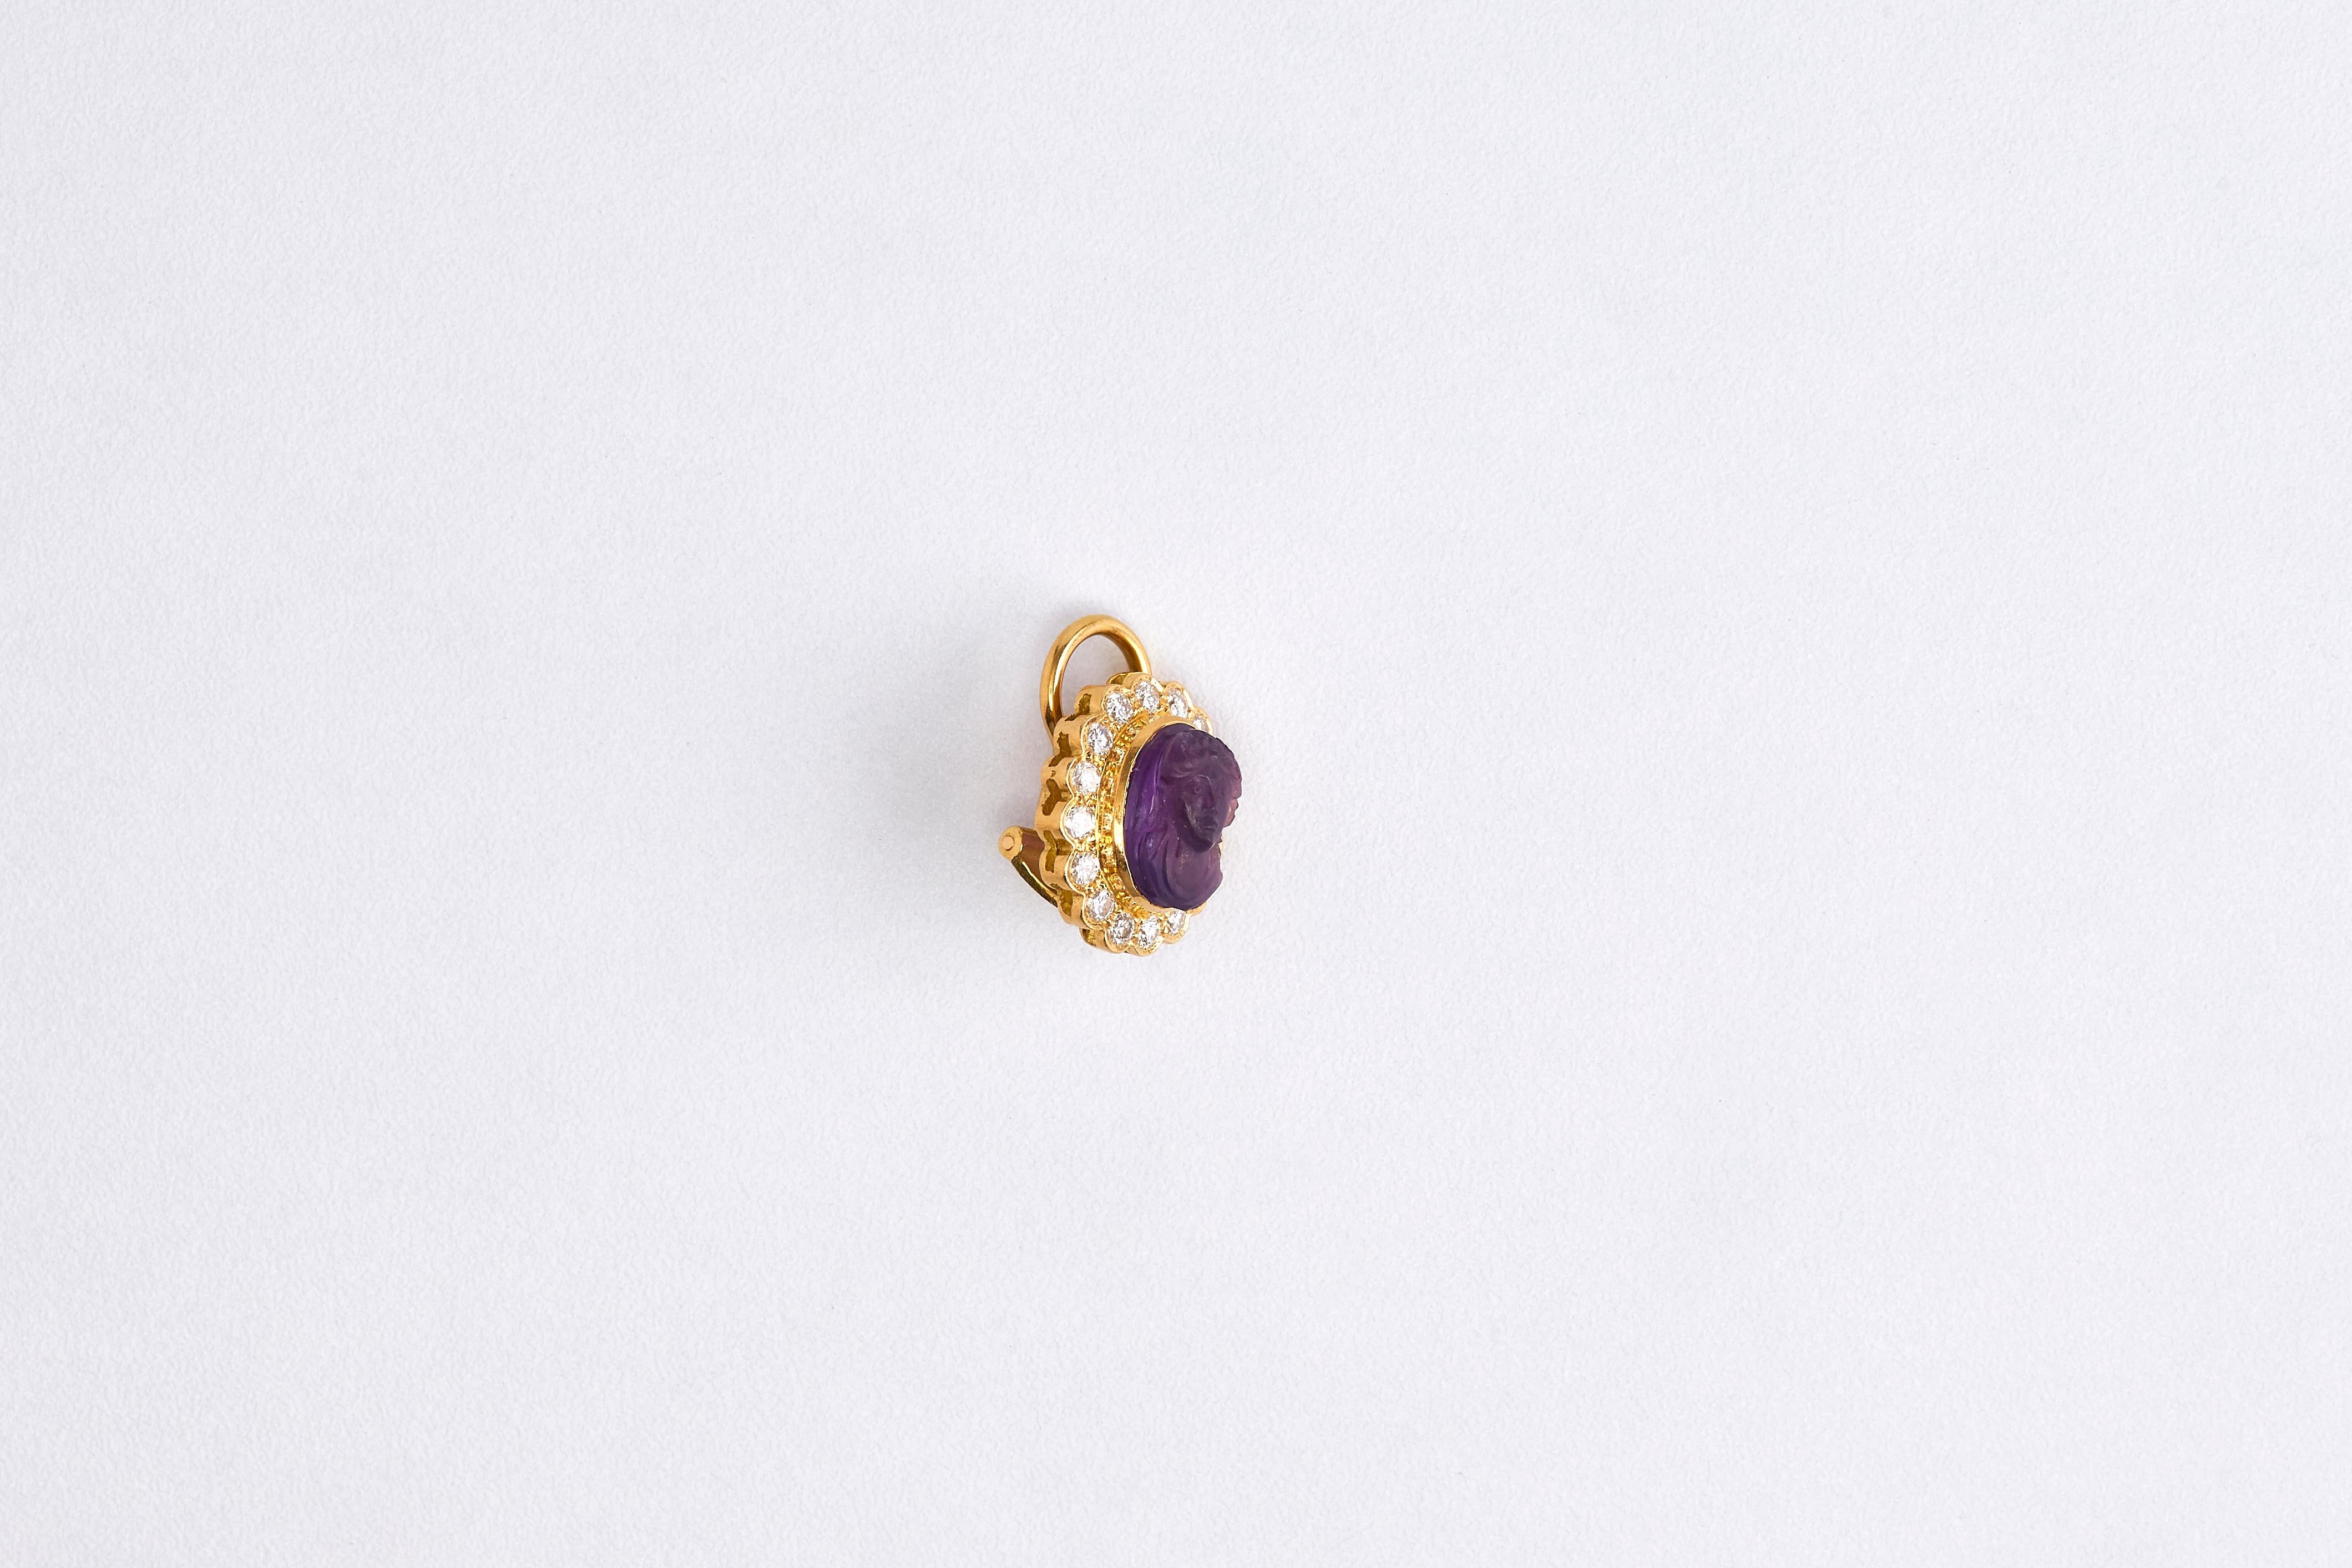 Pair of 18k Yellow Gold Diamond and Amethyst Earring

Gorgeous pair of earrings. Center stone is an Amethyst carved with a woman's face on it. 
Amethyst is surrounded by 1.20 G VVS1 round cut diamonds.
These earrings were made in France in the